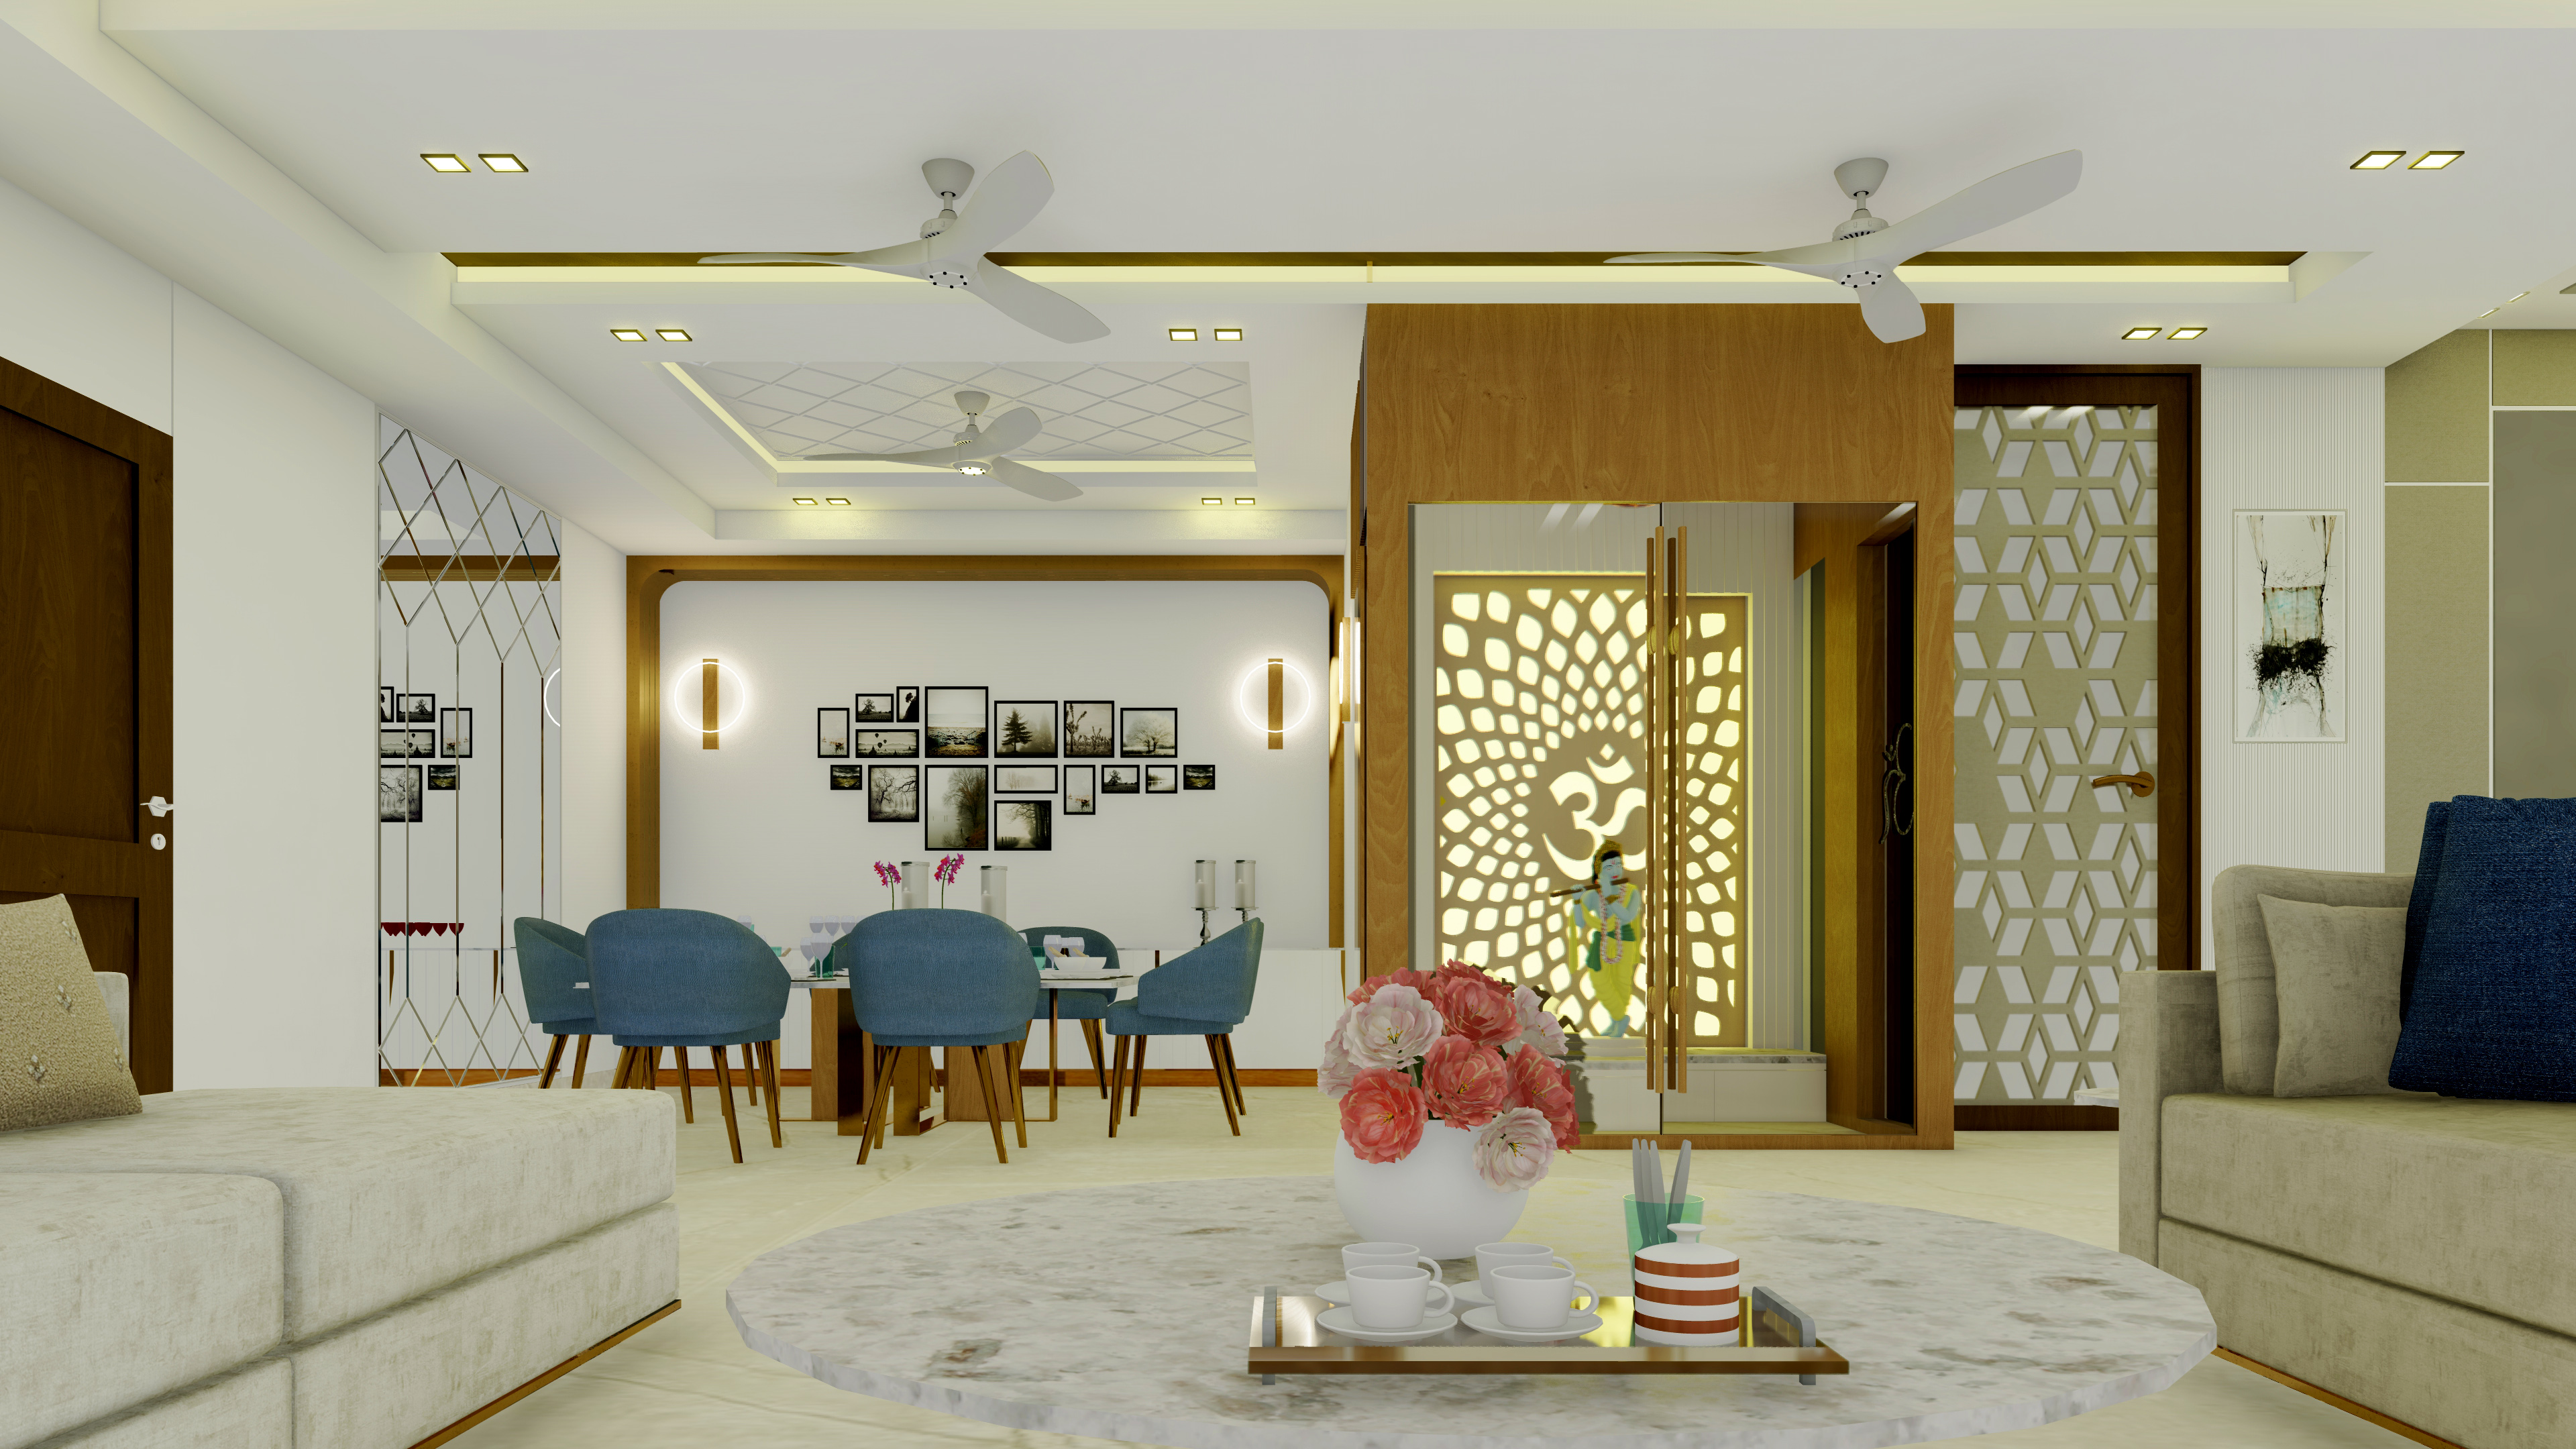 Dining Area Design With Furniture